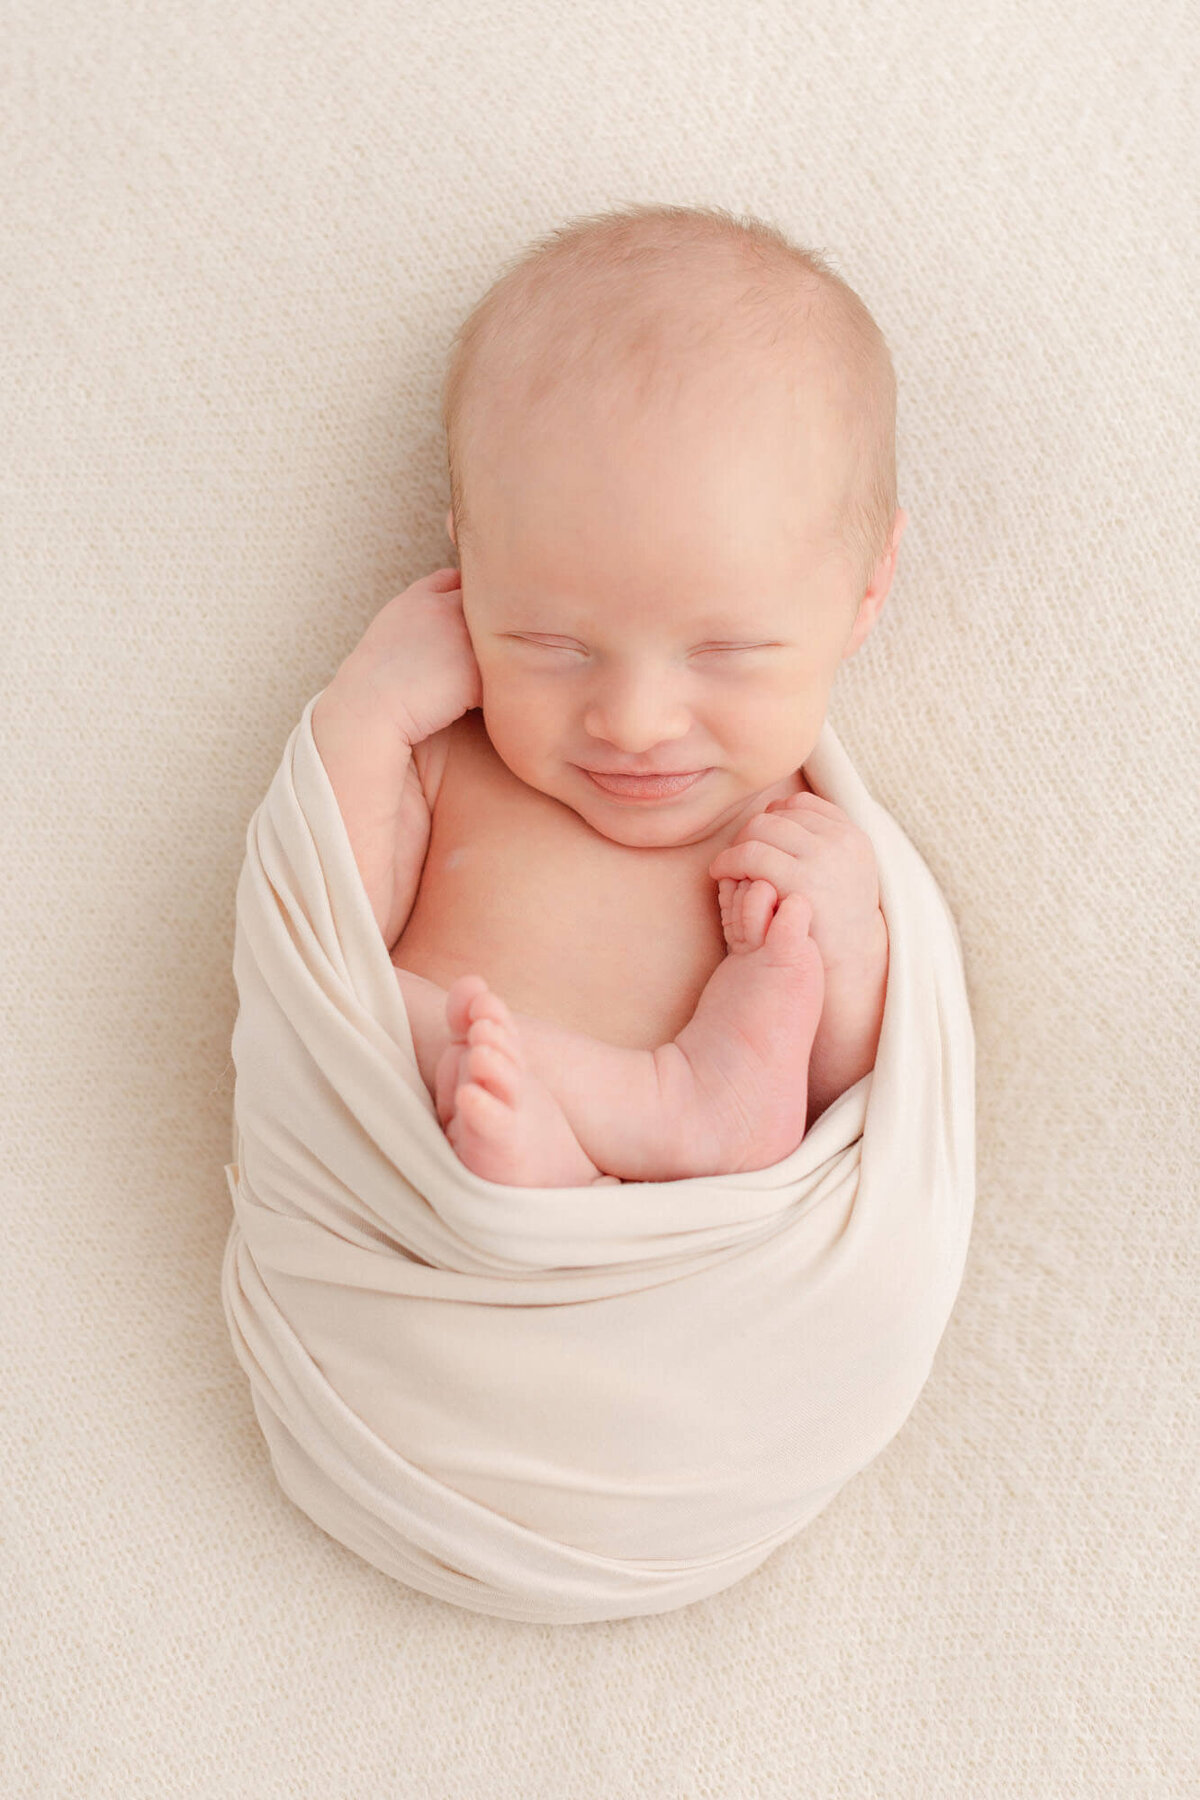 Newborn Babe laying on his back on a beige blanket with a beige wrap around his body. His arms and feet and tummy are showing and one hand is up by his cheek. He is sleeping and has a little grin on his face.